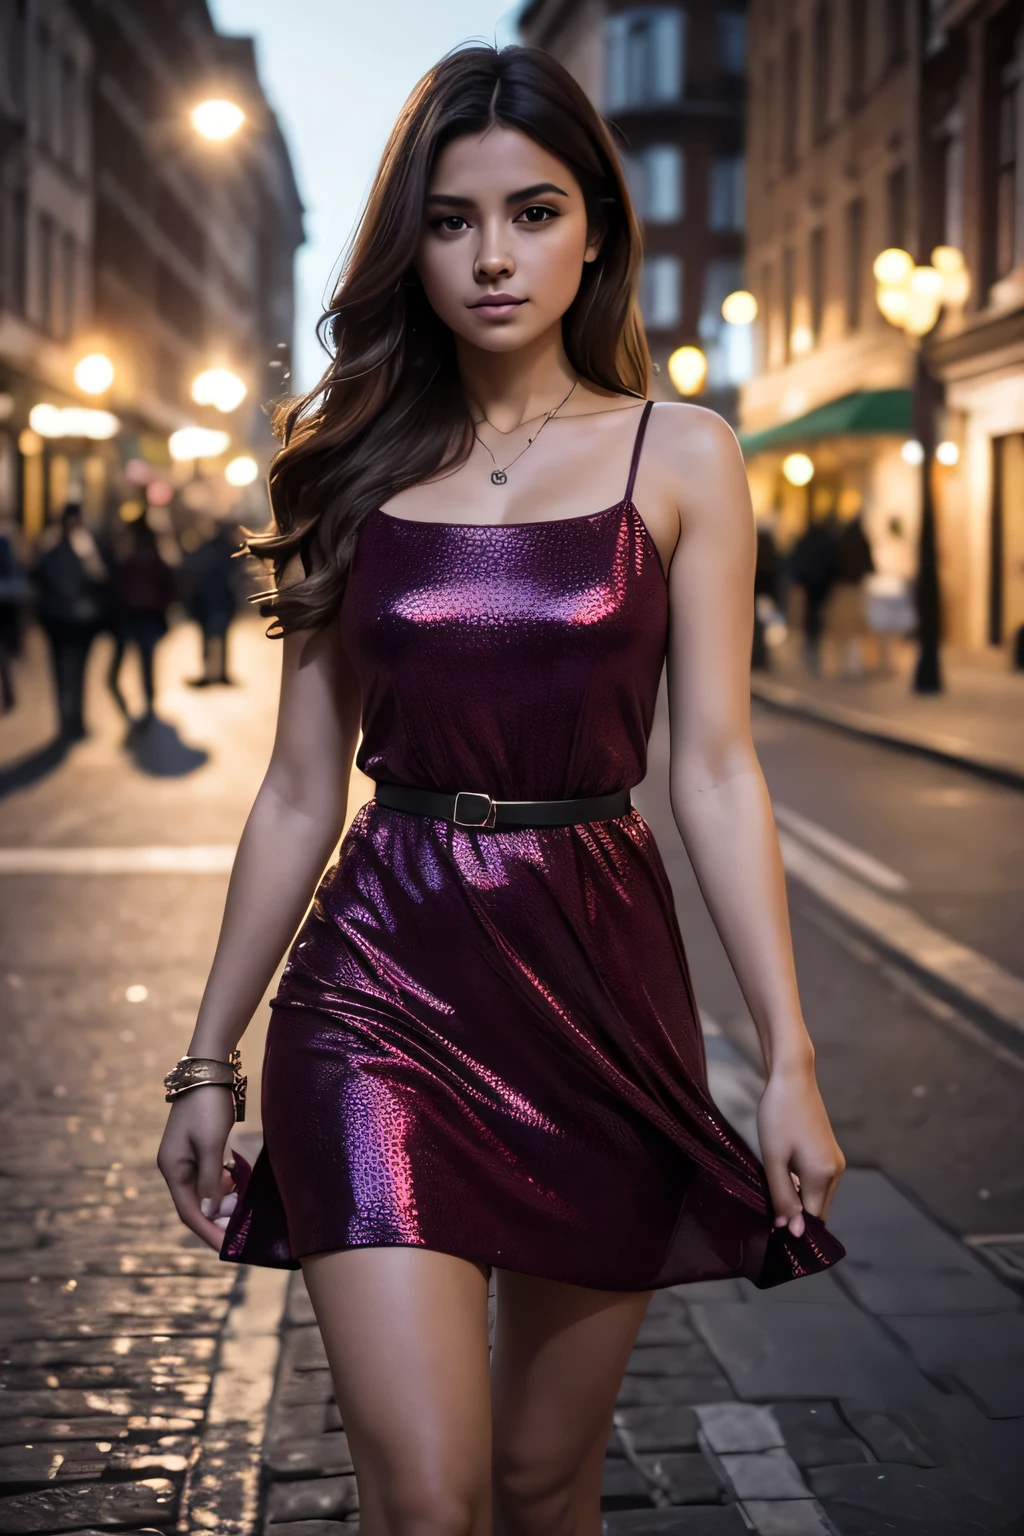 (Best quality:1.5), high quality, realistic, detailed, (European appearance), ((to the waist)), beautiful facial features, (1 Brunette Girl), in a dress, to the streets,  At night , cinematic lighting, Resolution 8K, bright colors